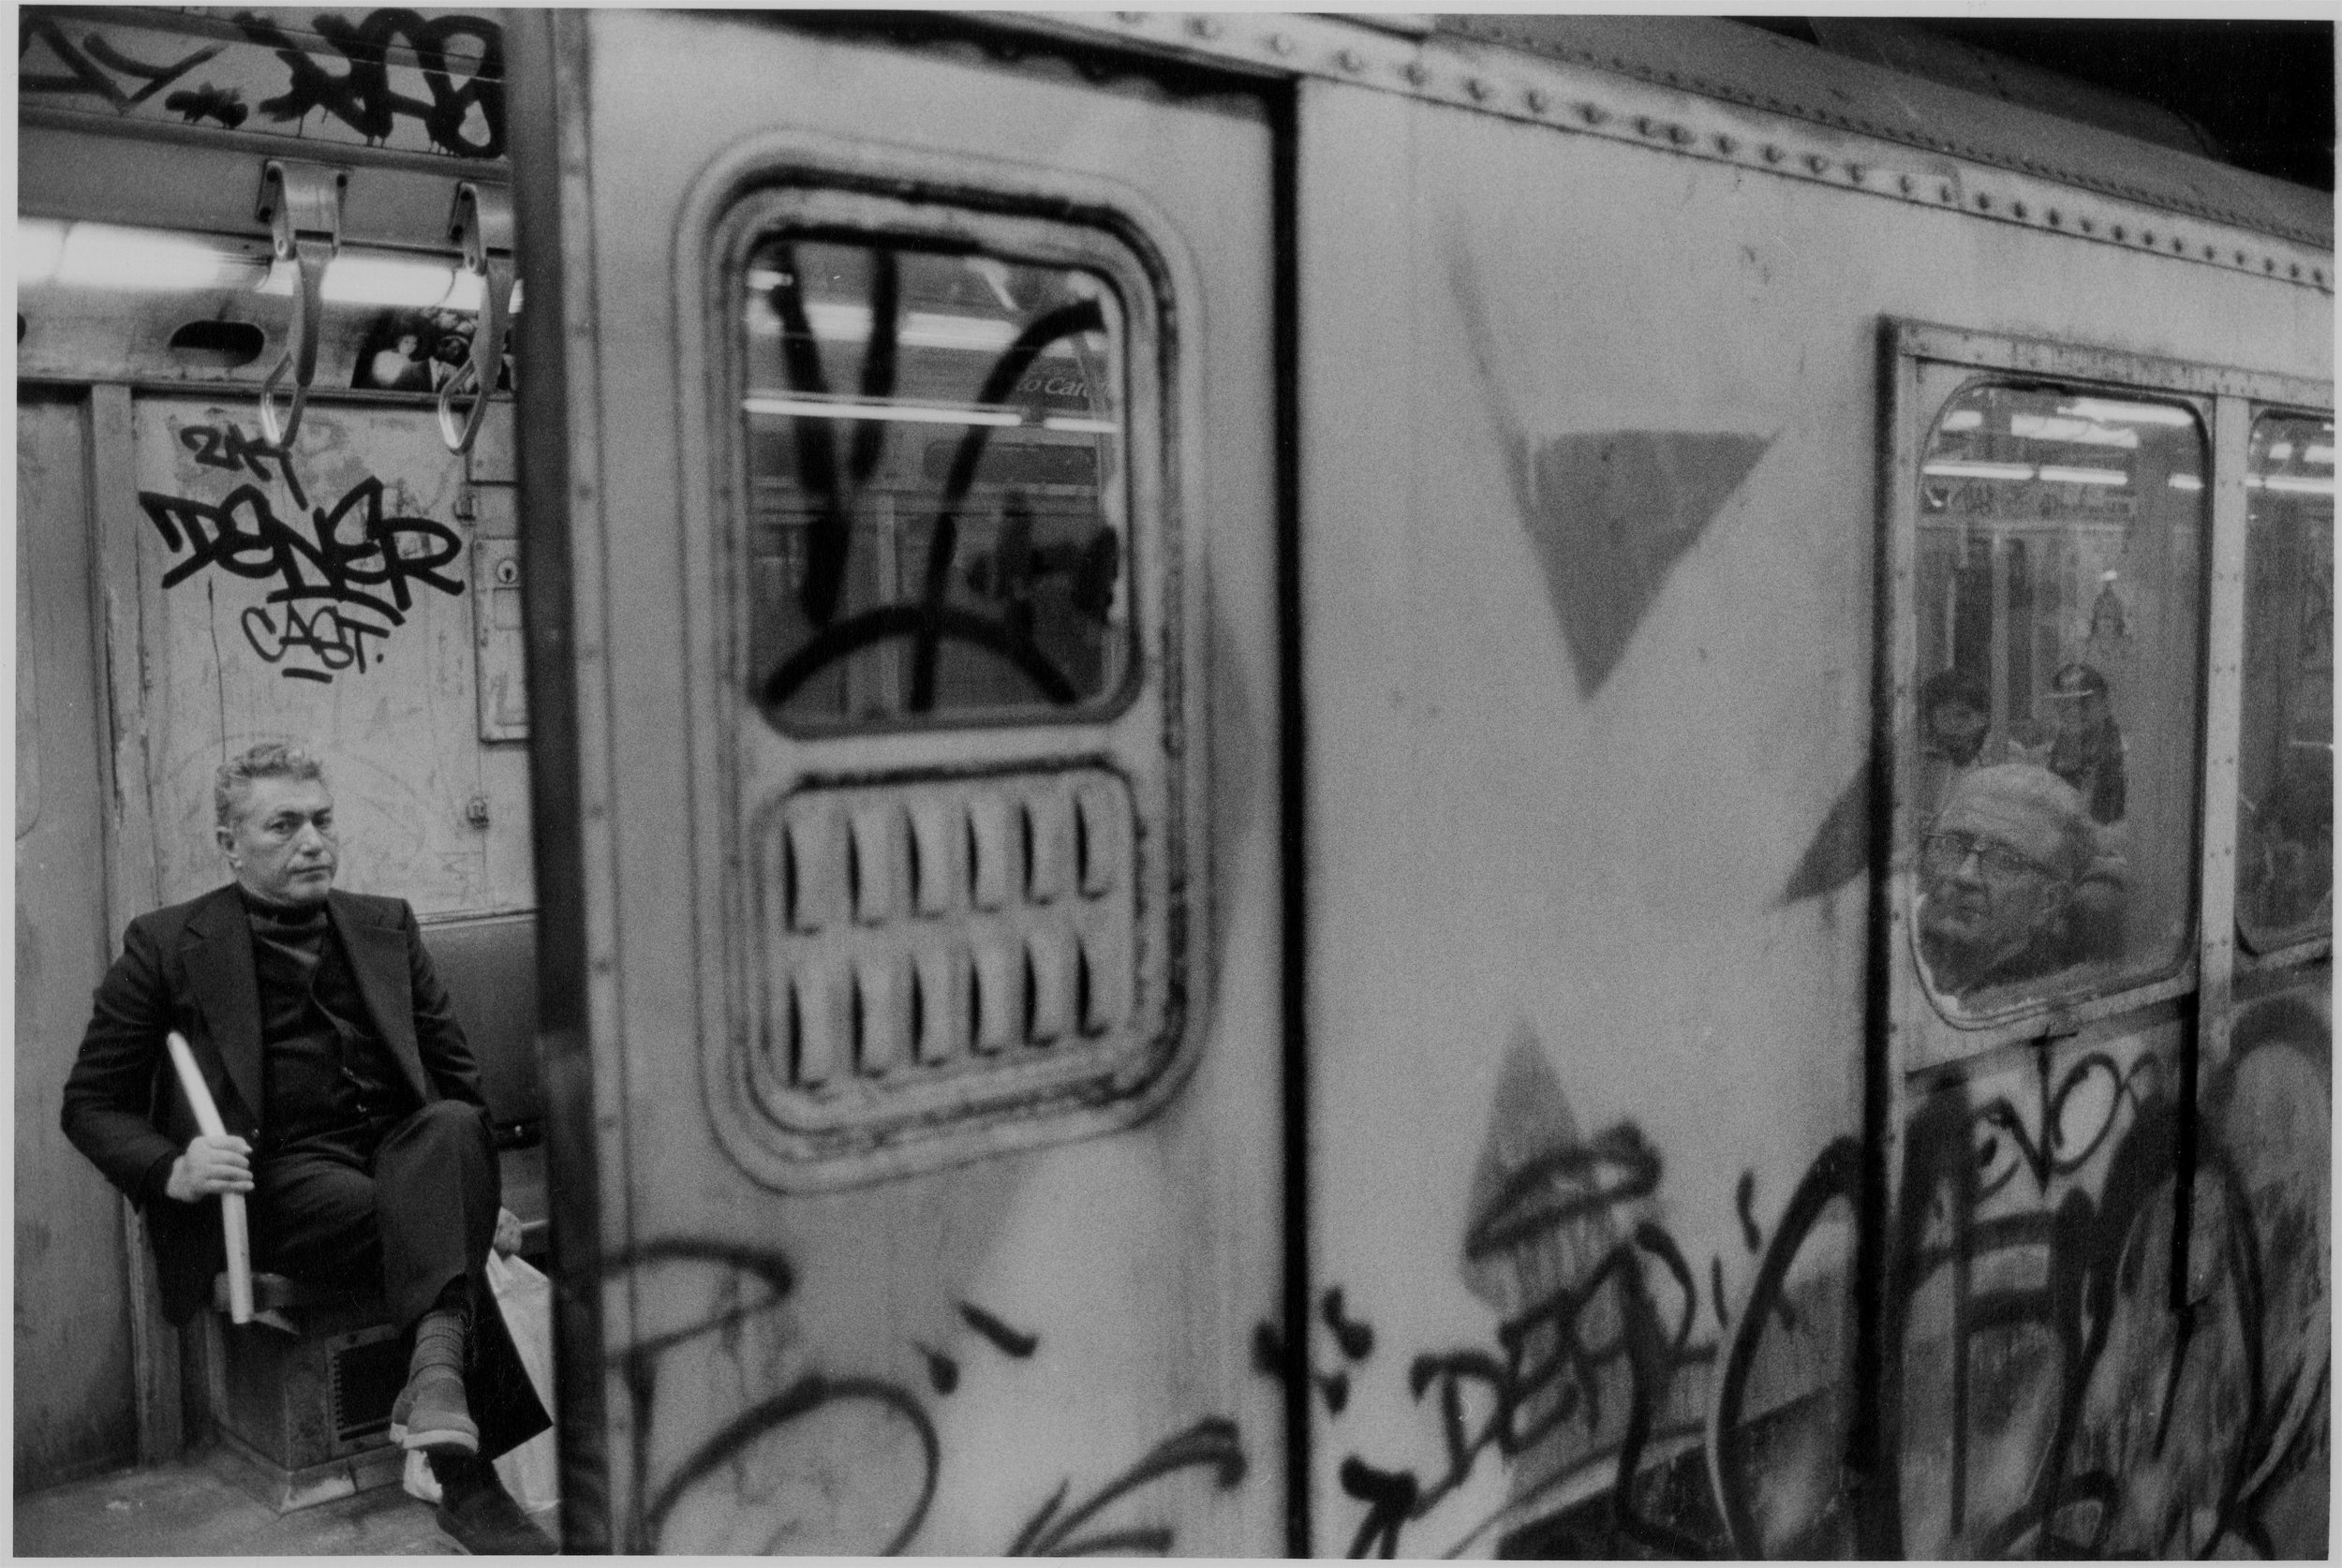 vented subway door/all eyes on me, nyc, early 1980’s